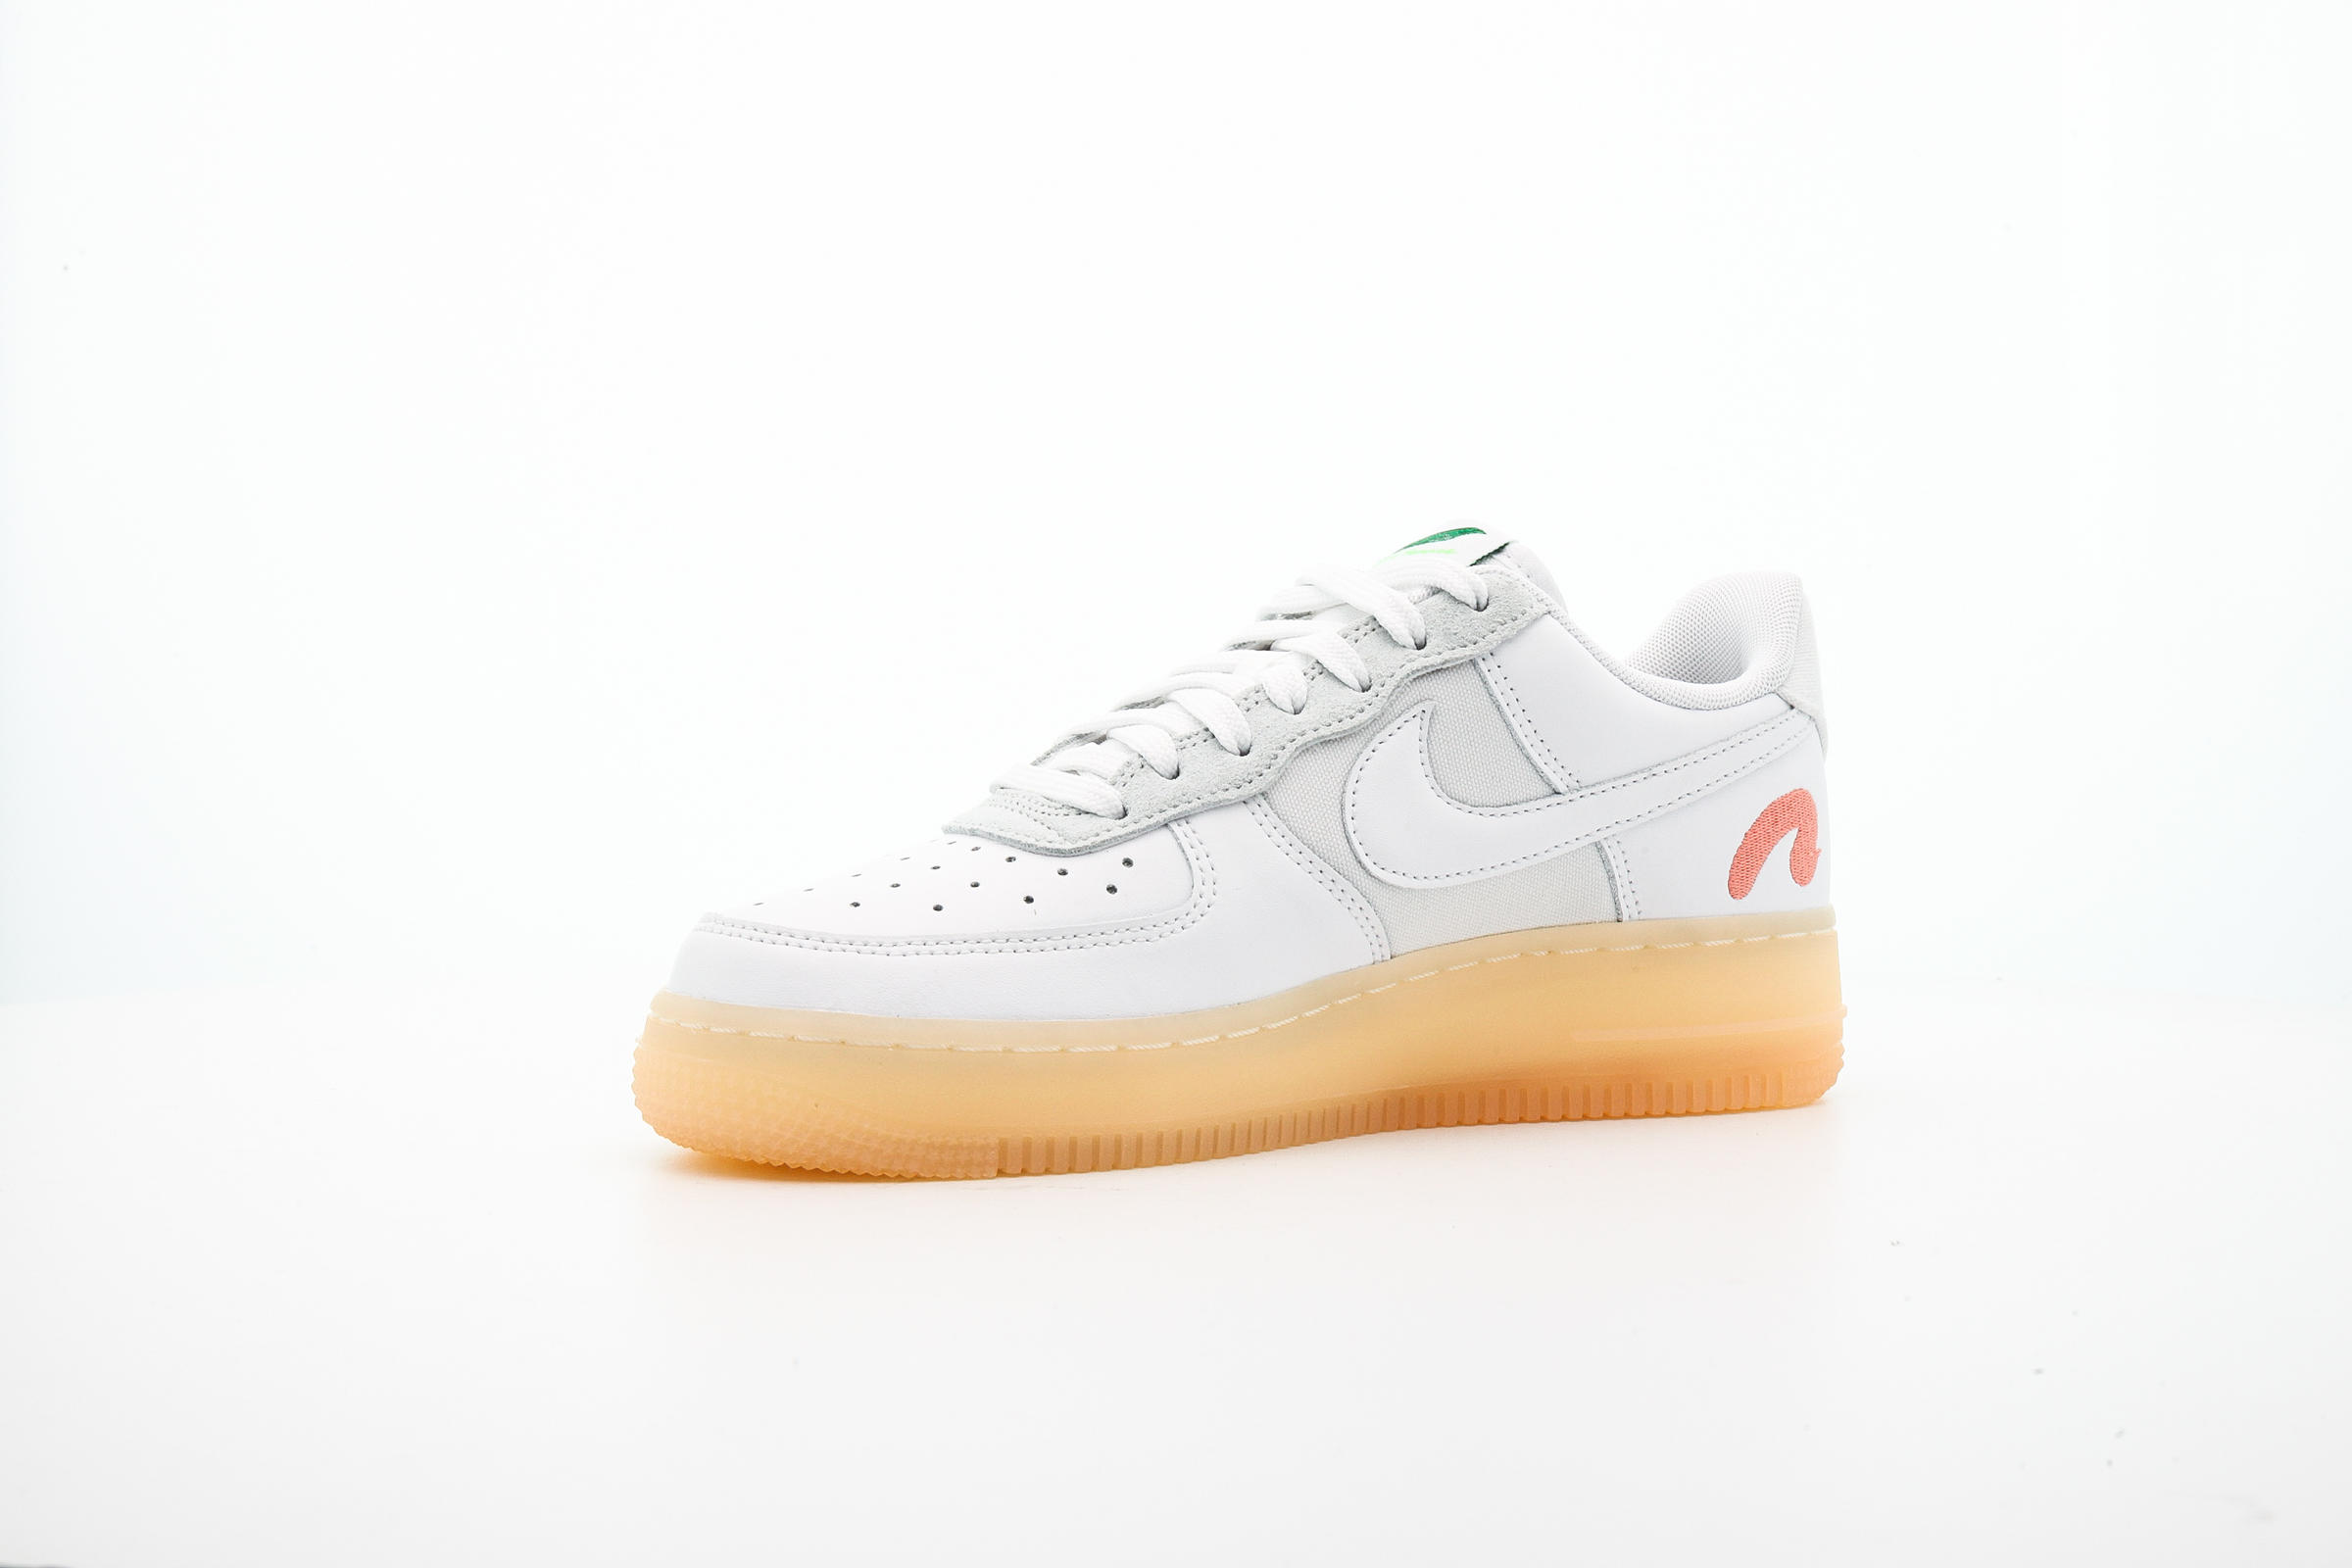 Nike FLYLEATHER AIR FORCE 1 "WHITE"